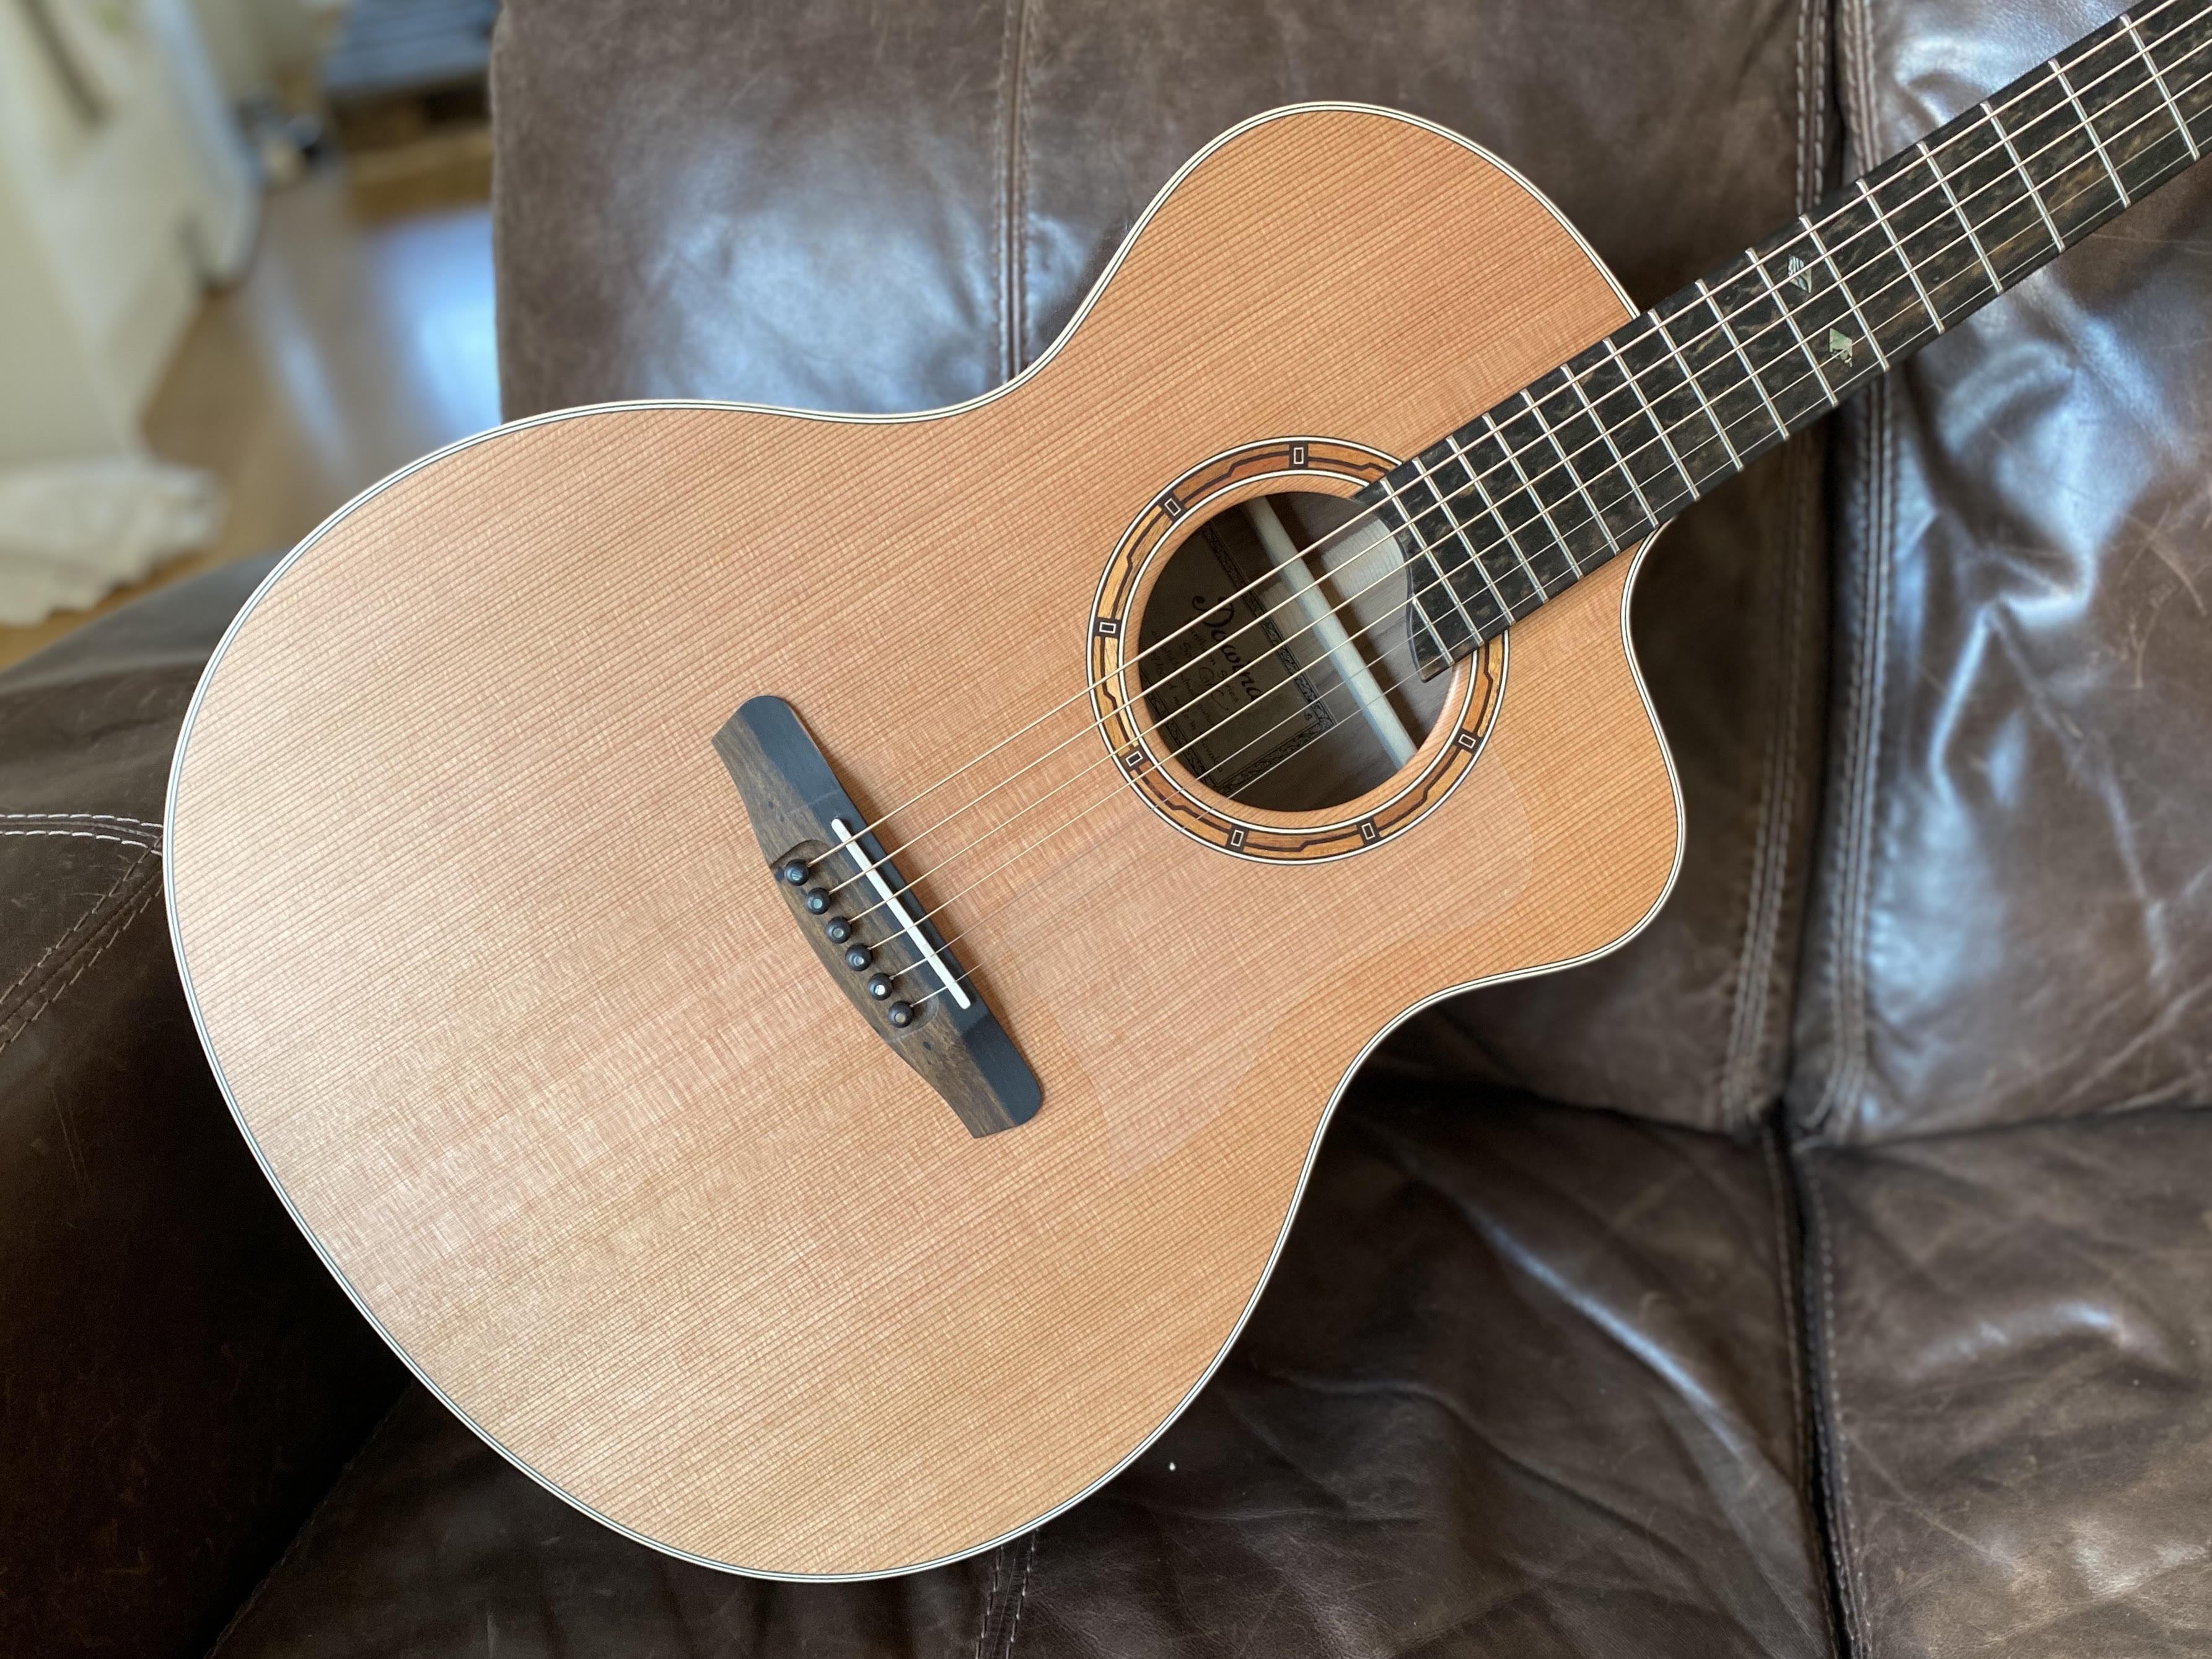 Dowina Walnut (Sol) JC, Acoustic Guitar for sale at Richards Guitars.